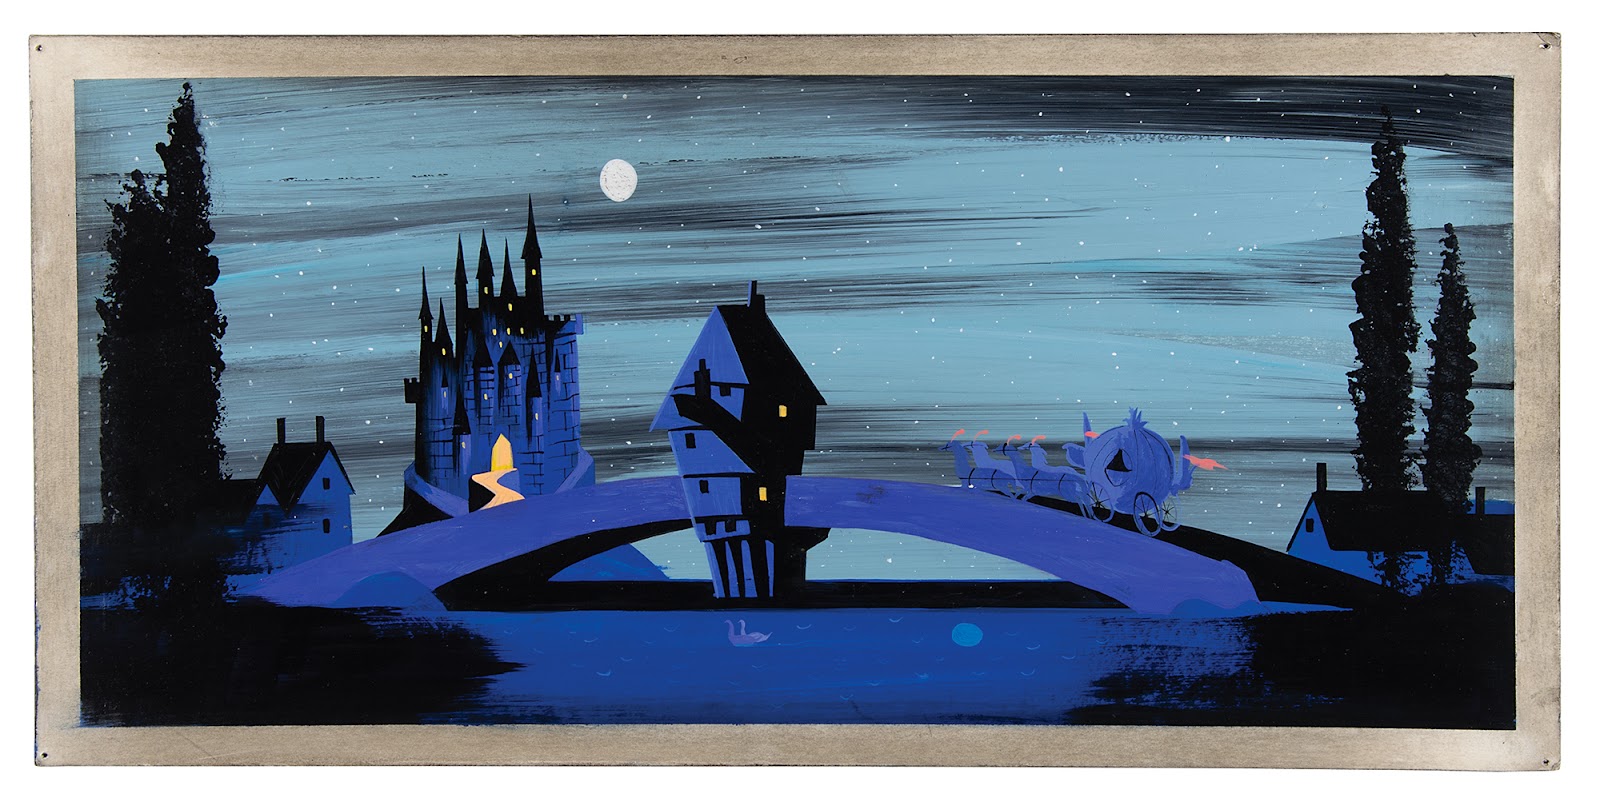 Mary Blair’s rendering of Cinderella’s carriage dashing to the ball under a starry sky sold for $20,354 at RR Auction.